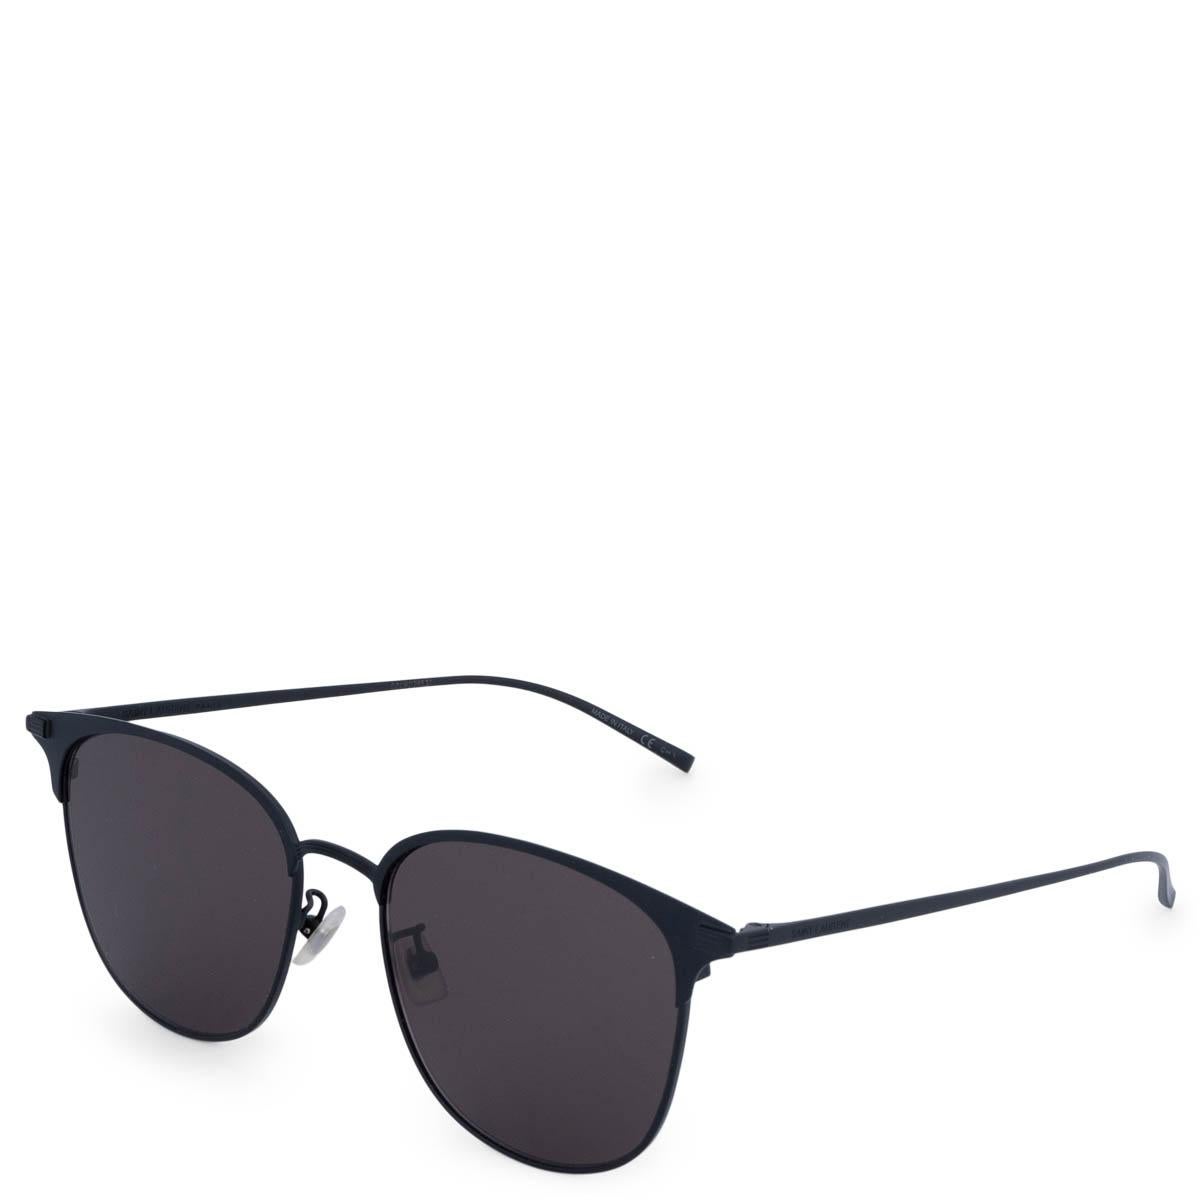 100% authentic Saint Laurent SL 203/K sunglasses in black metal with grey lenses. Feature a logo engraving on the arms. Have been worn and are in excellent condition. No case.

Measurements
Model	SL 203/K 003 57*18*150
Width	15cm (5.9in)
Height	5cm